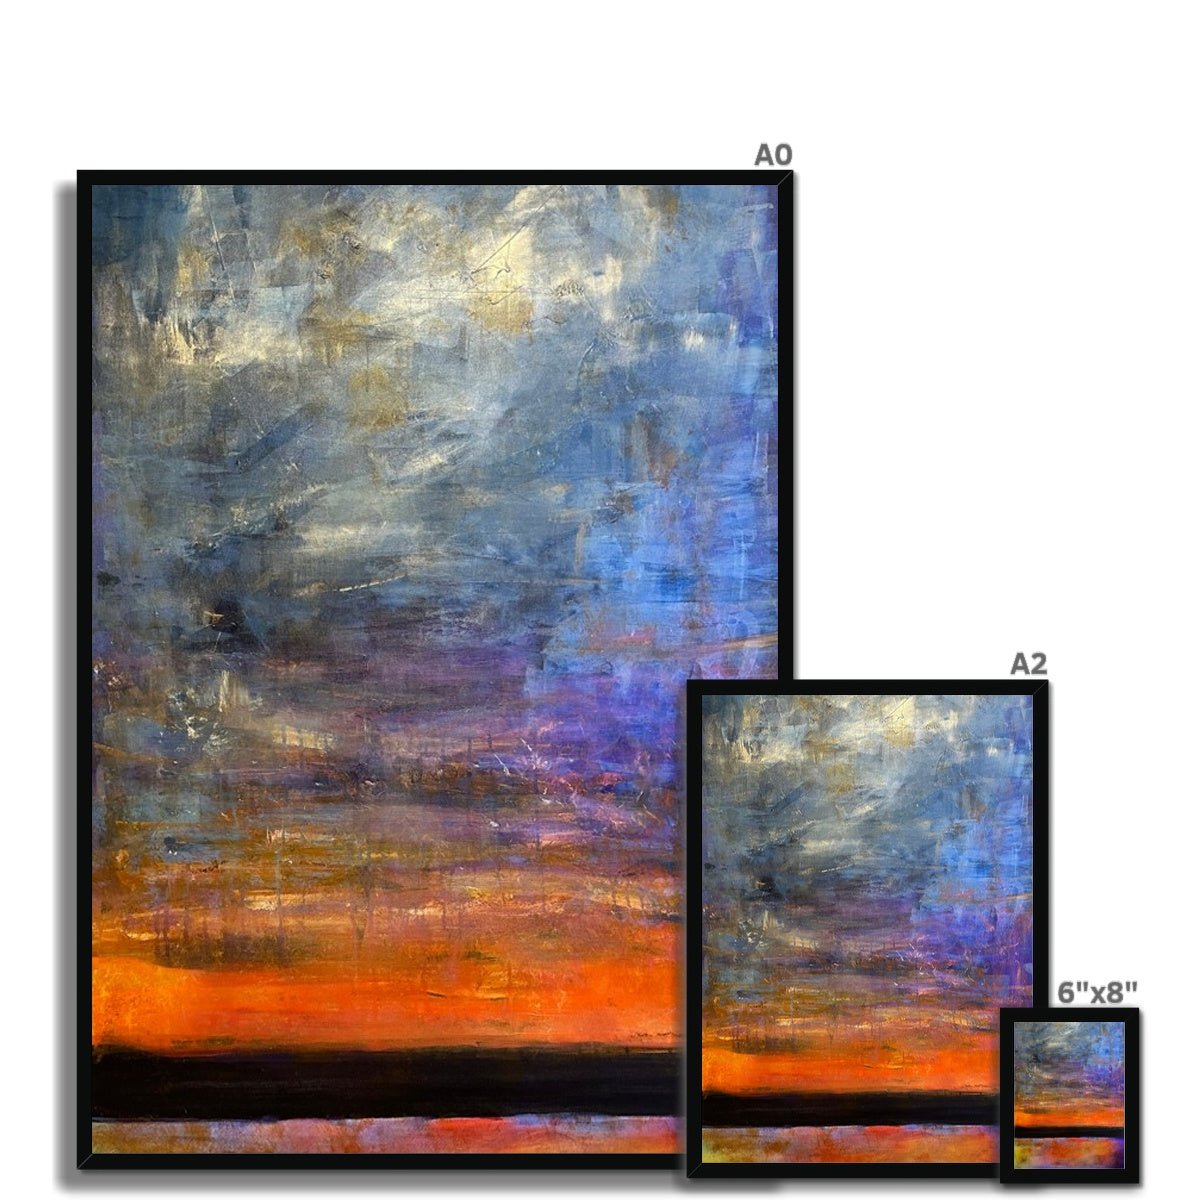 Horizon Dreams Abstract Painting | Framed Prints From Scotland-Framed Prints-Abstract & Impressionistic Art Gallery-Paintings, Prints, Homeware, Art Gifts From Scotland By Scottish Artist Kevin Hunter